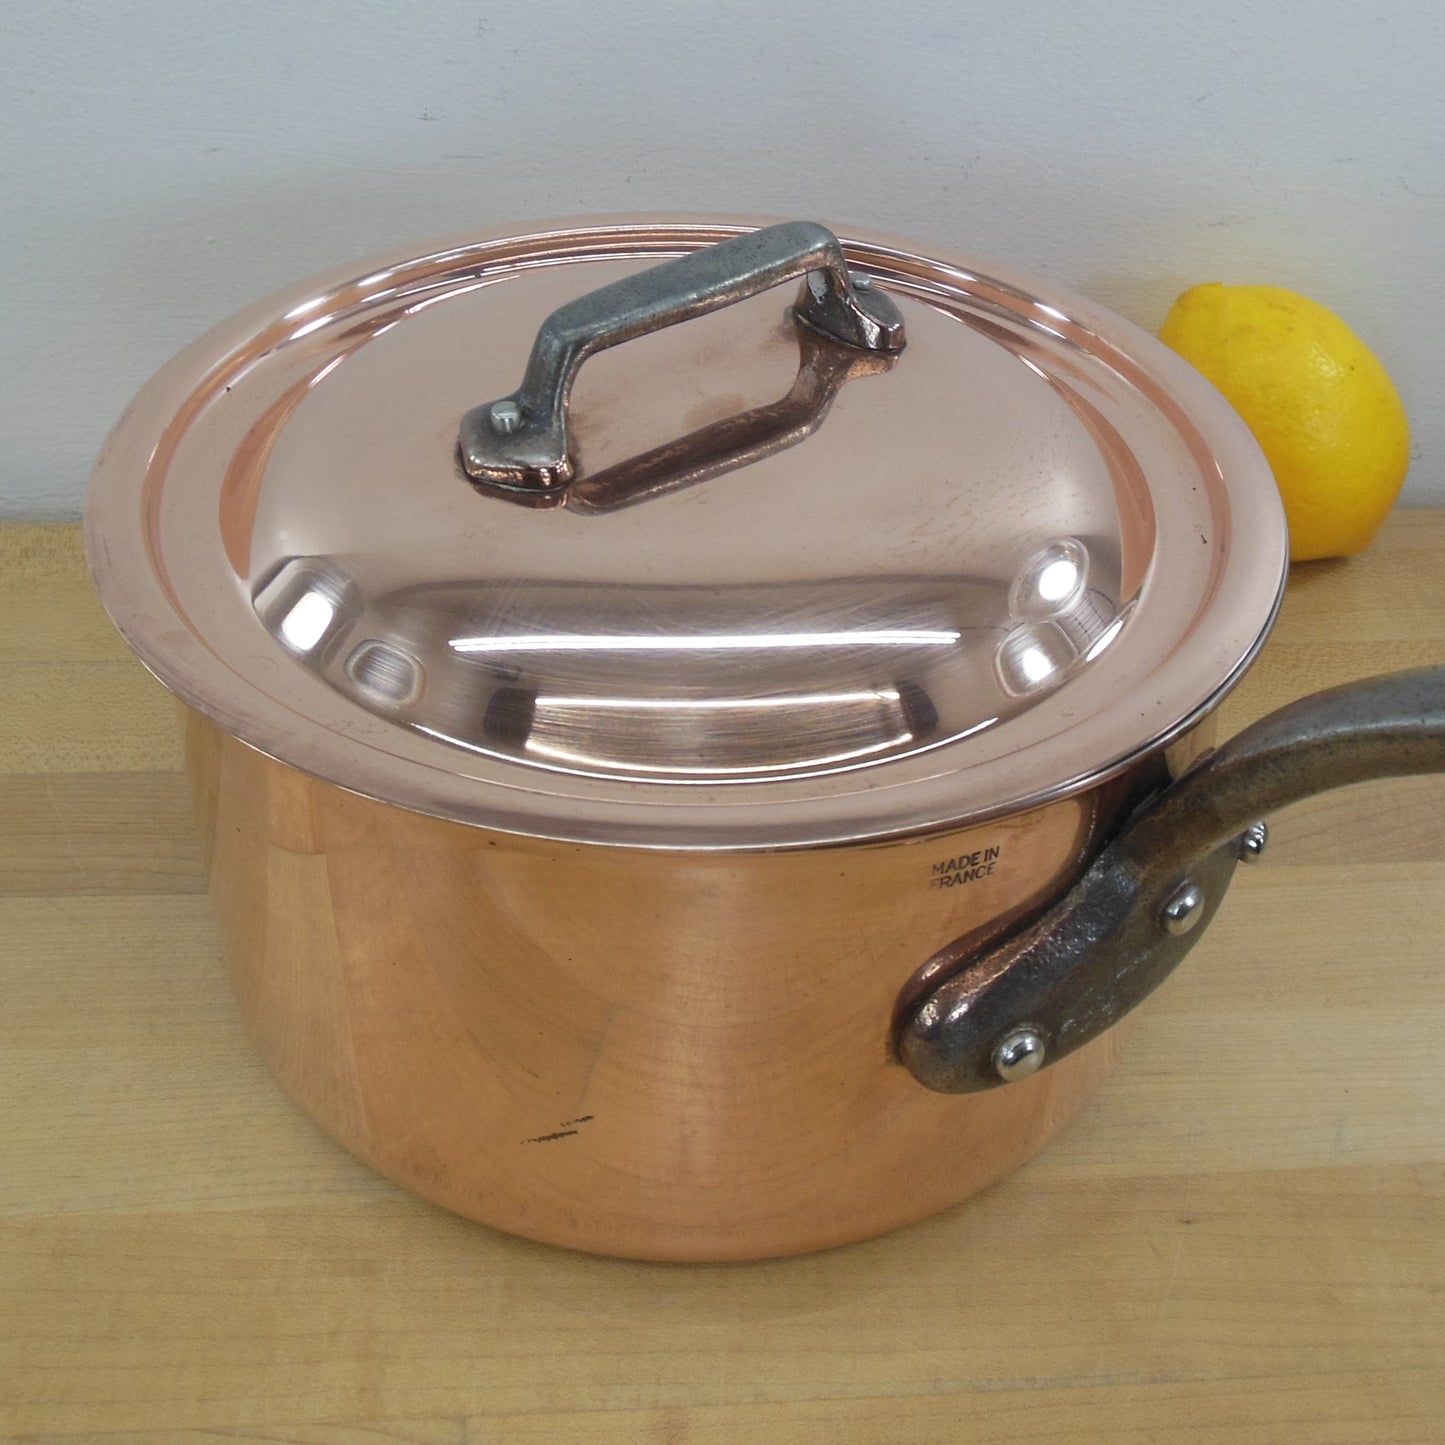 Unbranded Mauviel France Copper Stainless 3.5 Saucepan & Cover Vintage